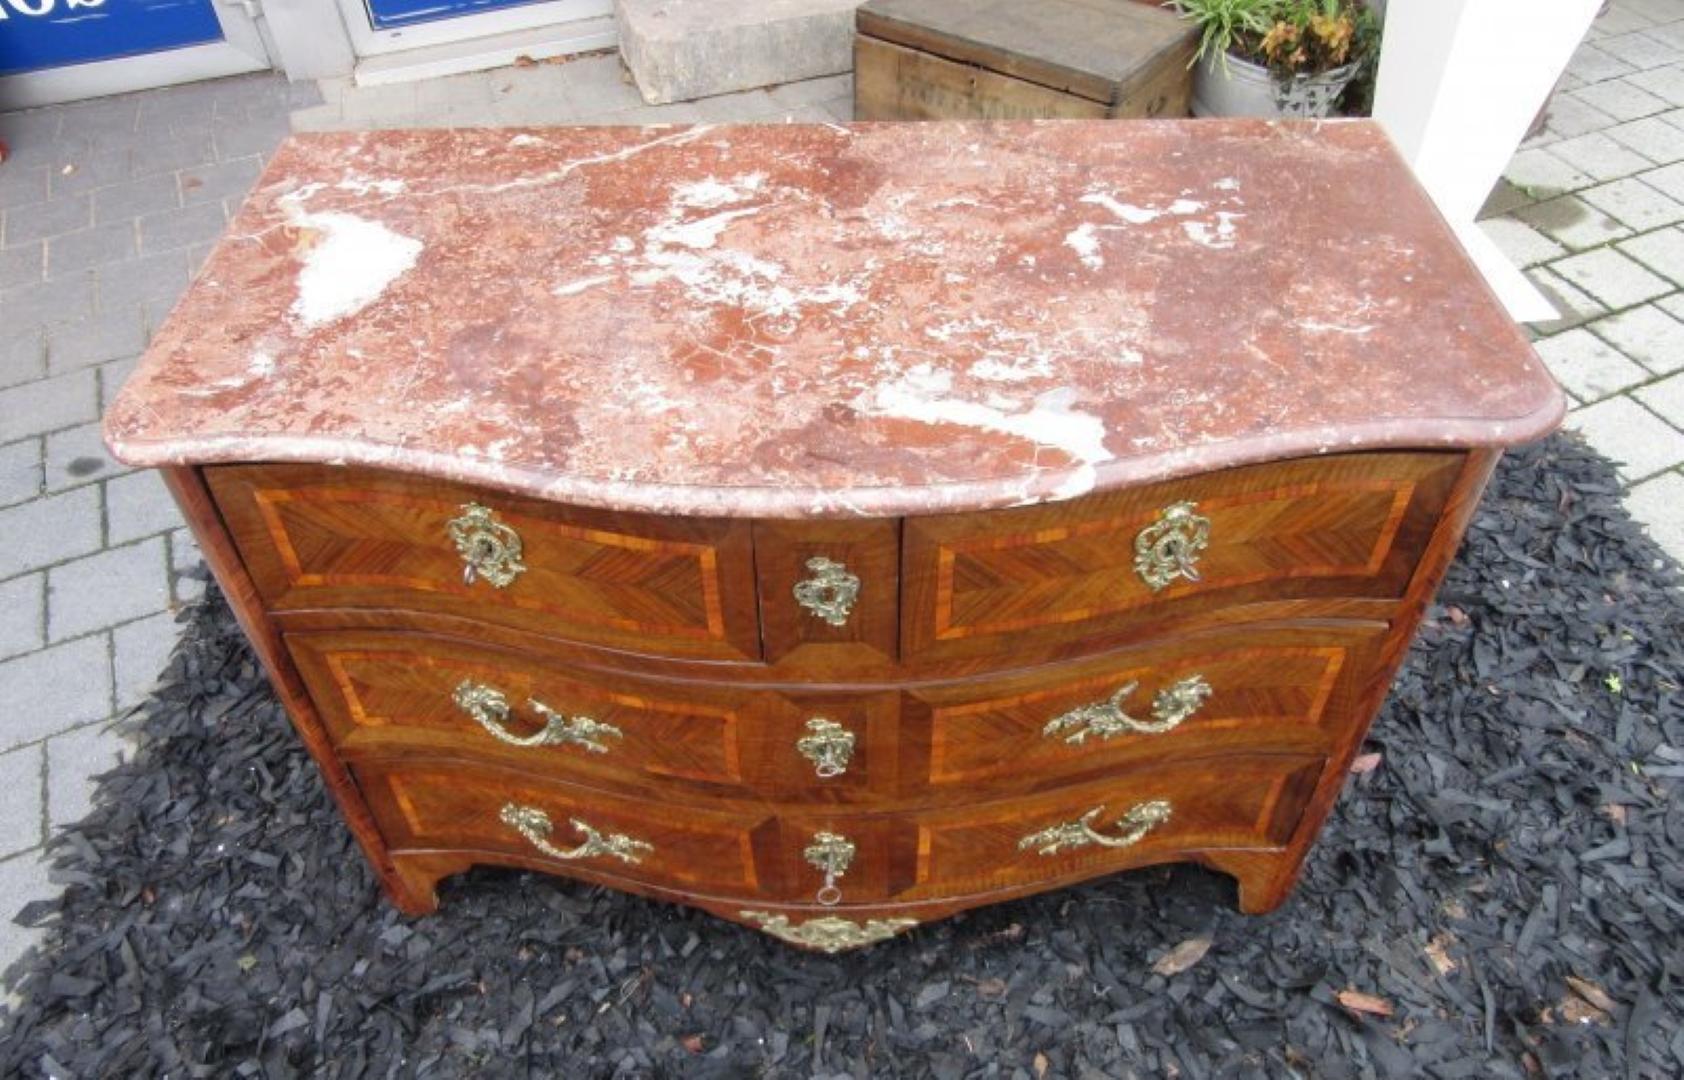 Original antique Baroque chest of drawers or commode from the 1780s with a curved front. Features stunningly worked original brass handles, key plates and wonderful ornamentations. The body is build out of massive oakwood veneered with luxurious